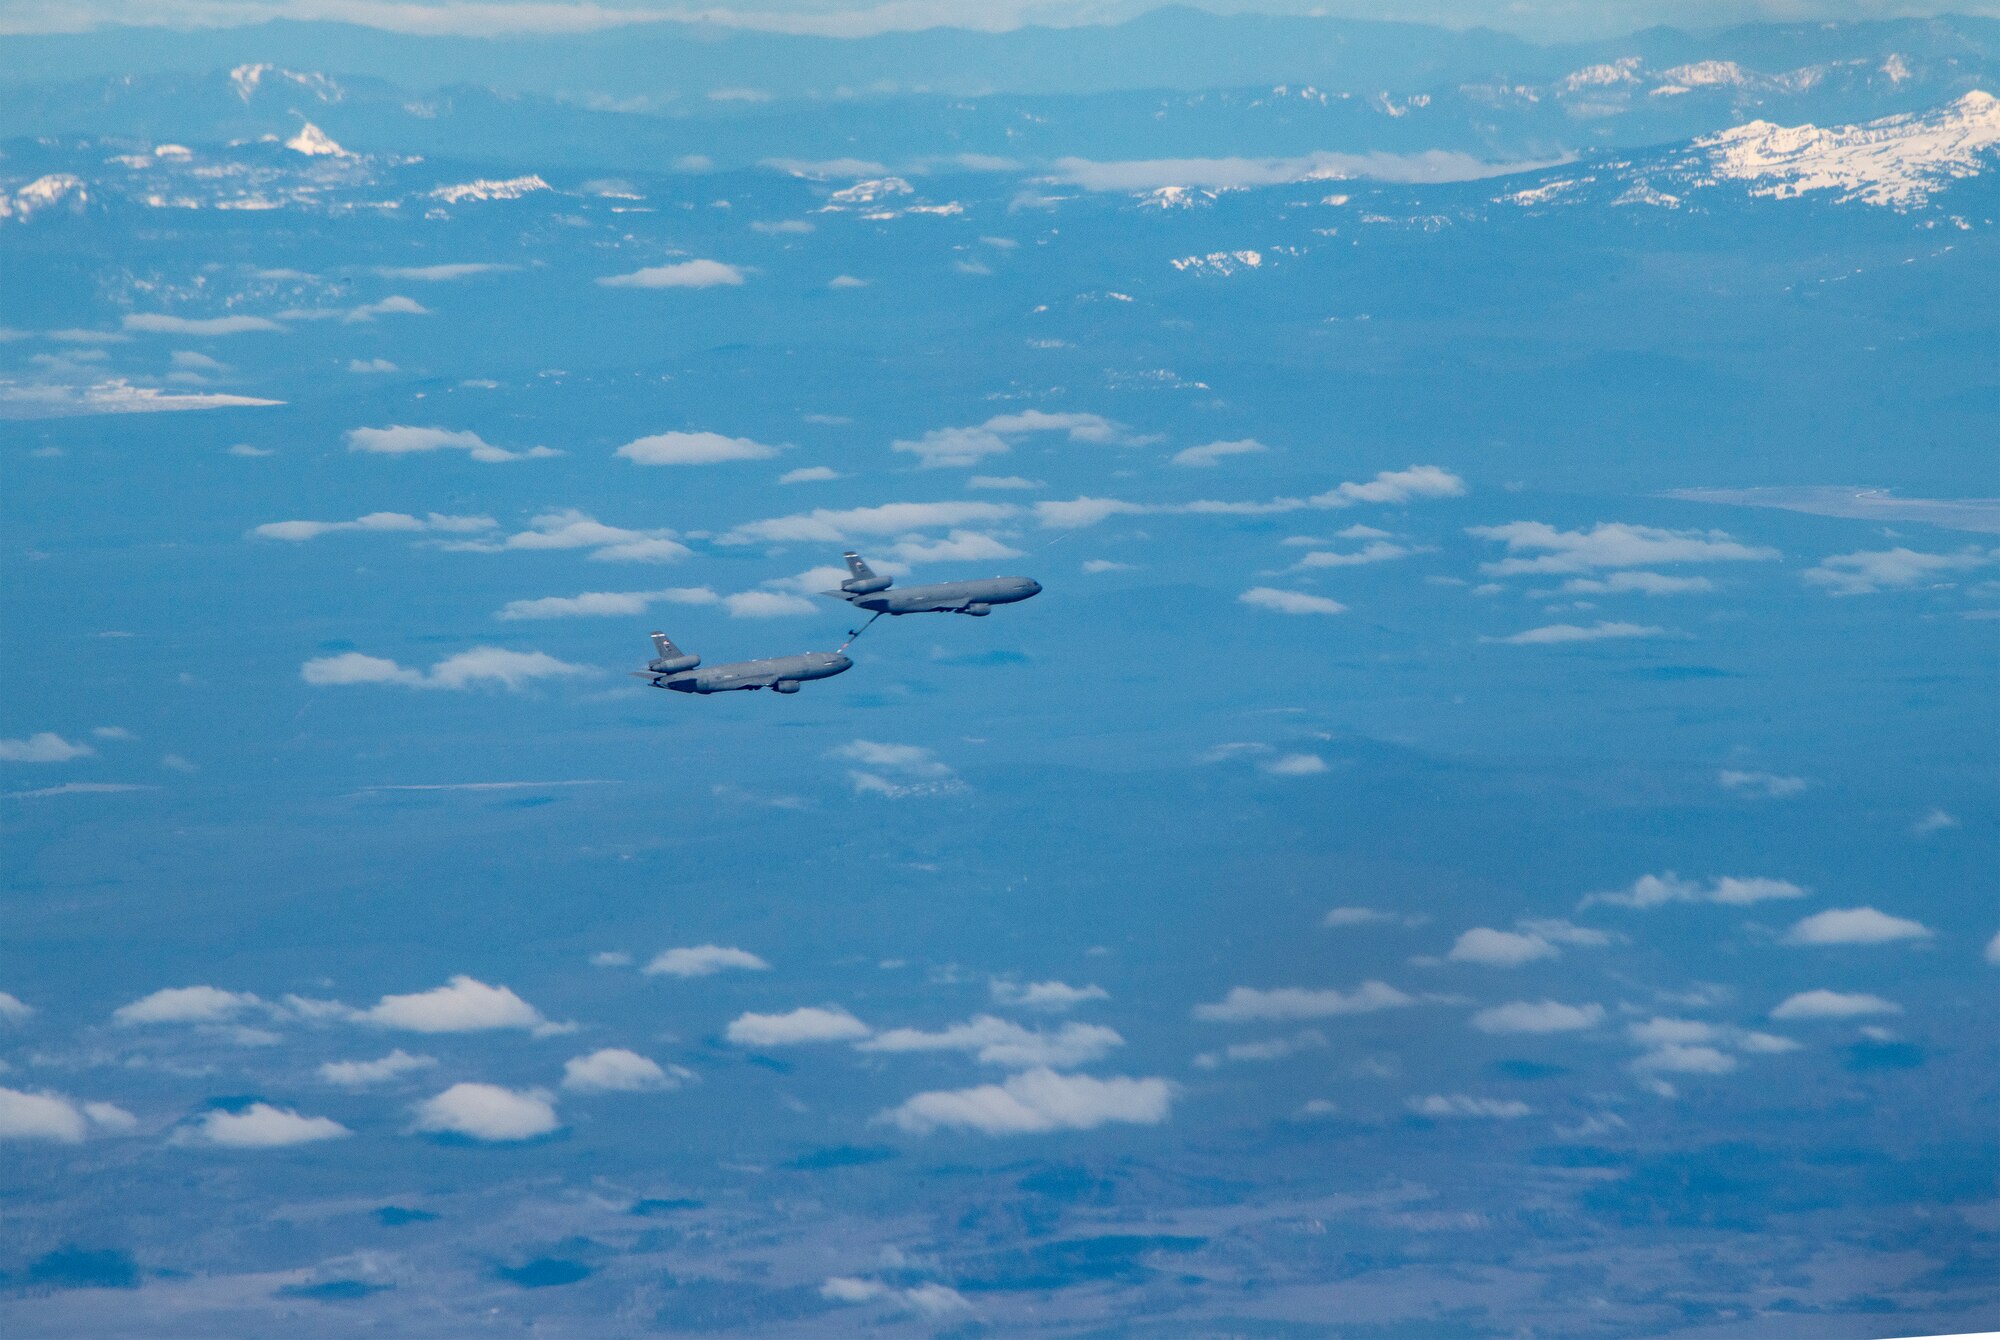 A U.S Air Force KC-10 Extenders conduct in-flight refueling maneuvers over a mountain range, March 22, 2022. The tankers were participating in an aerial refueling training mission over California and Oregon. (U.S. Air Force photo by Heide Couch)